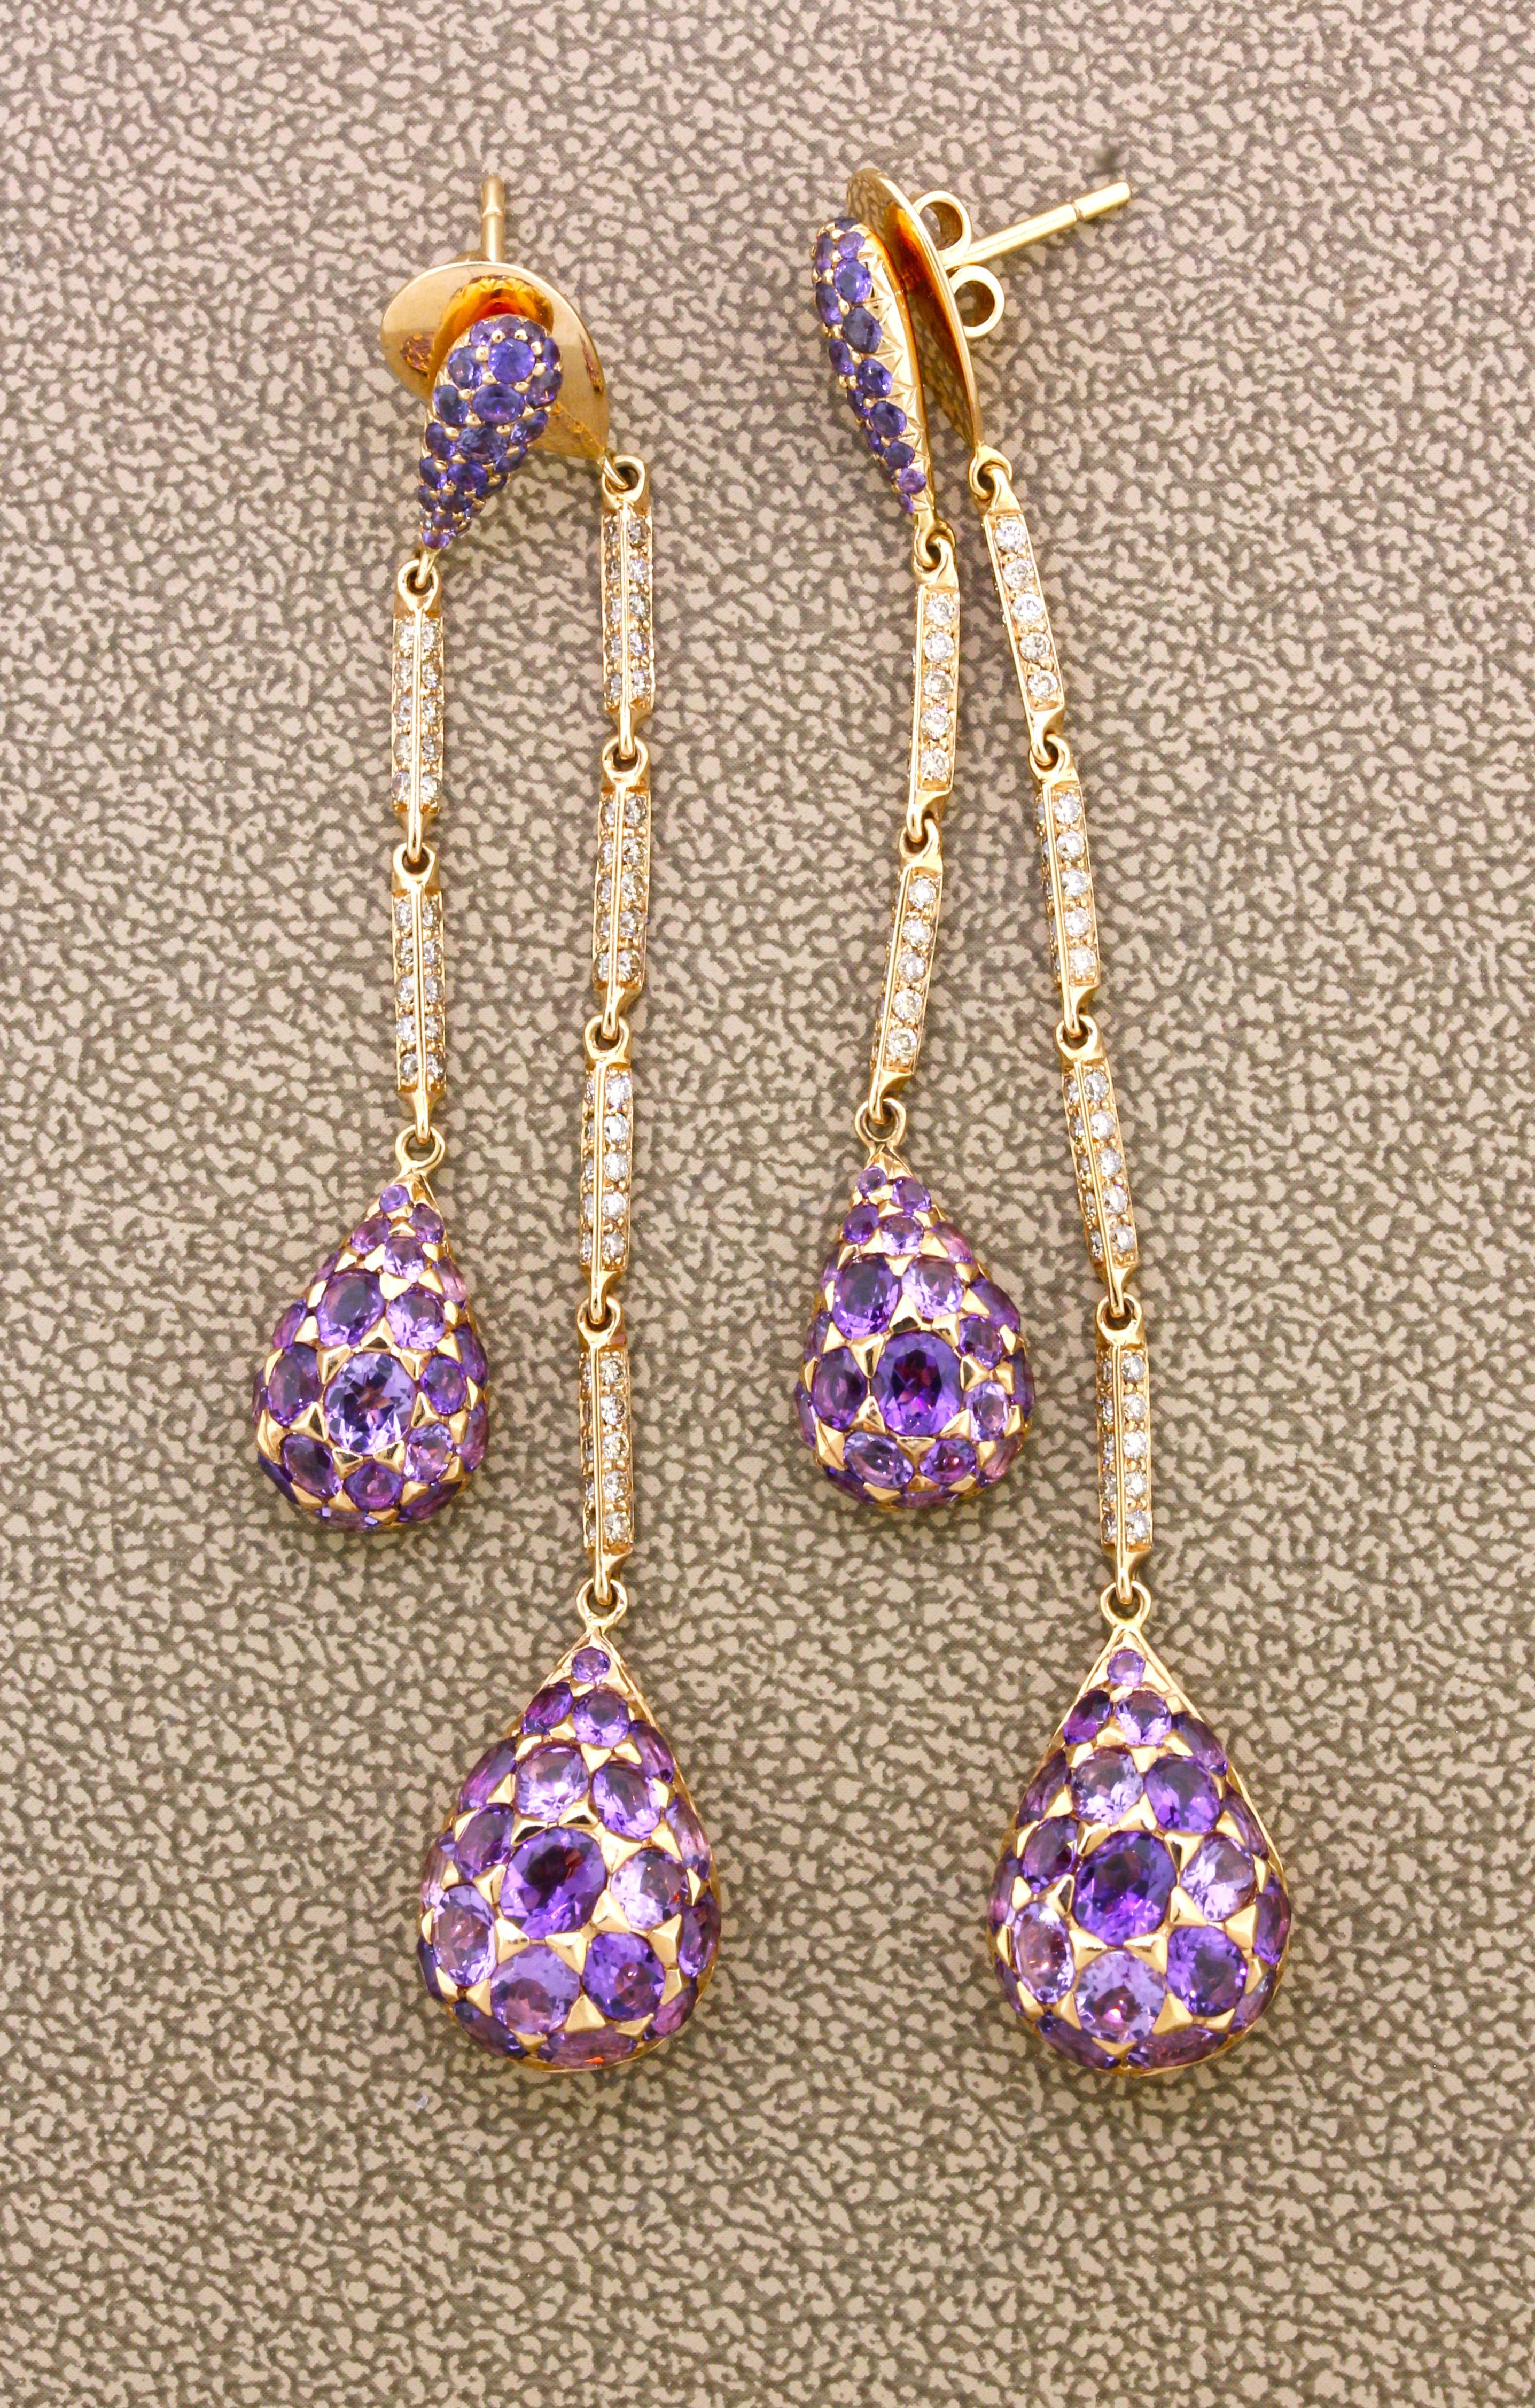 A fun and stylish pair of earrings featuring 6.40 carats of oval shape bright purple amethyst, 1.10 carats of round brilliant-cut diamonds, and 0.90 carats of vivid purple sapphire set on the top posts of the earrings. There are multiple bails and